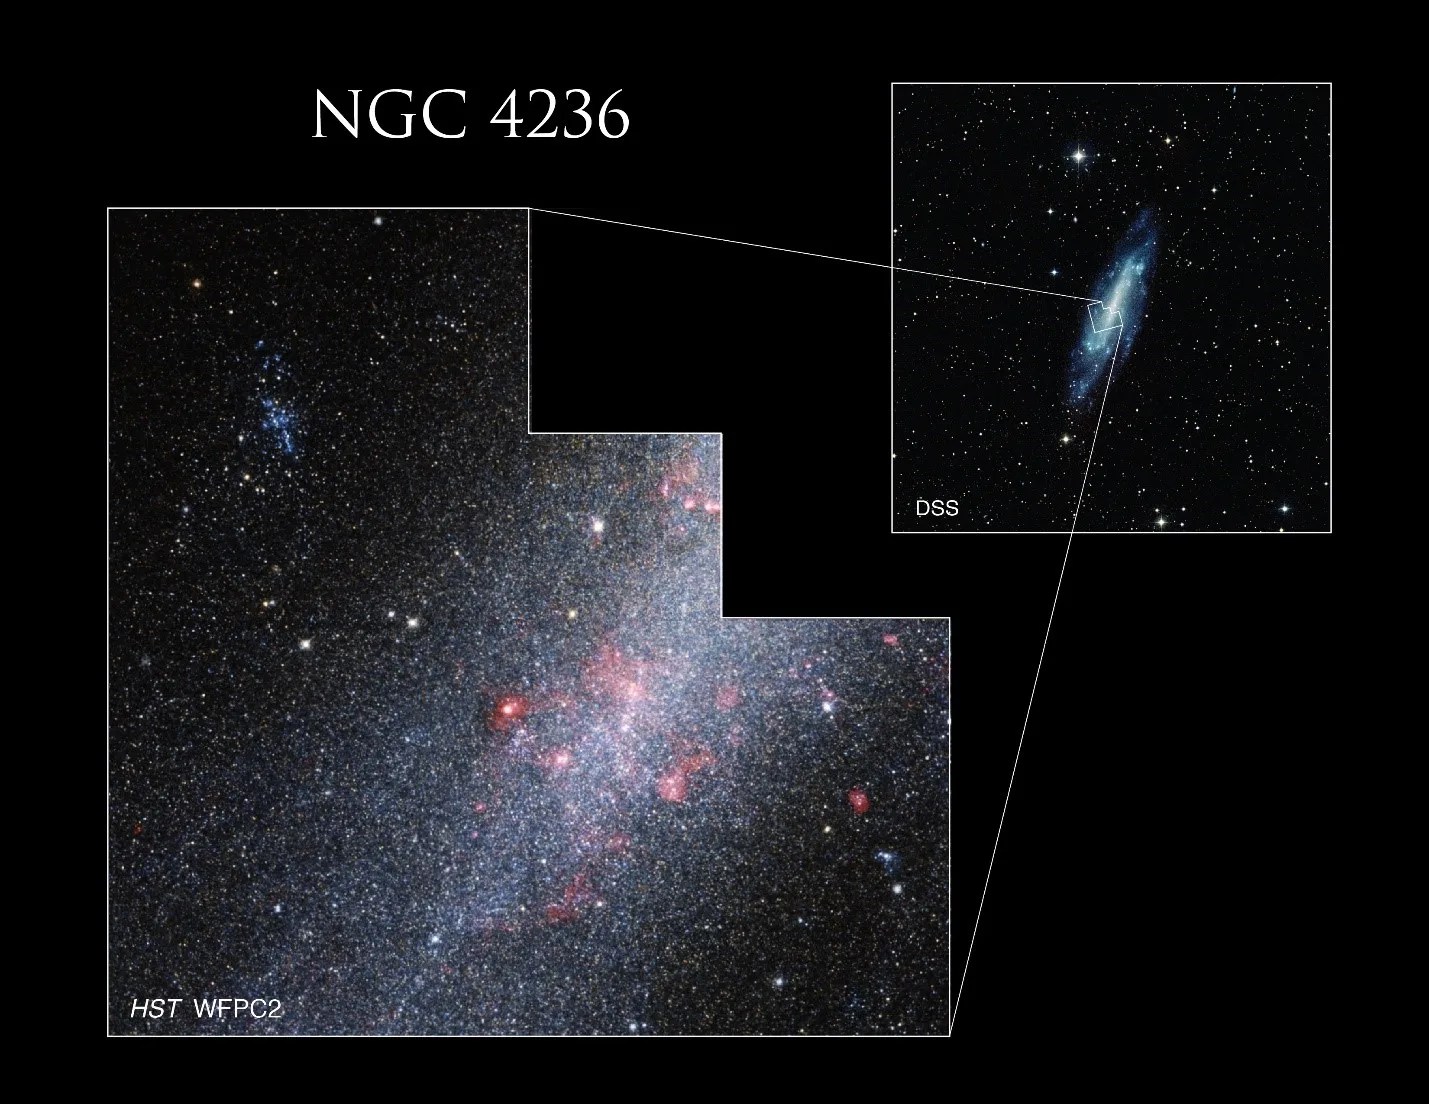 On the left of the image is the Hubble shot of C3 with the dust and stars of blue and white.